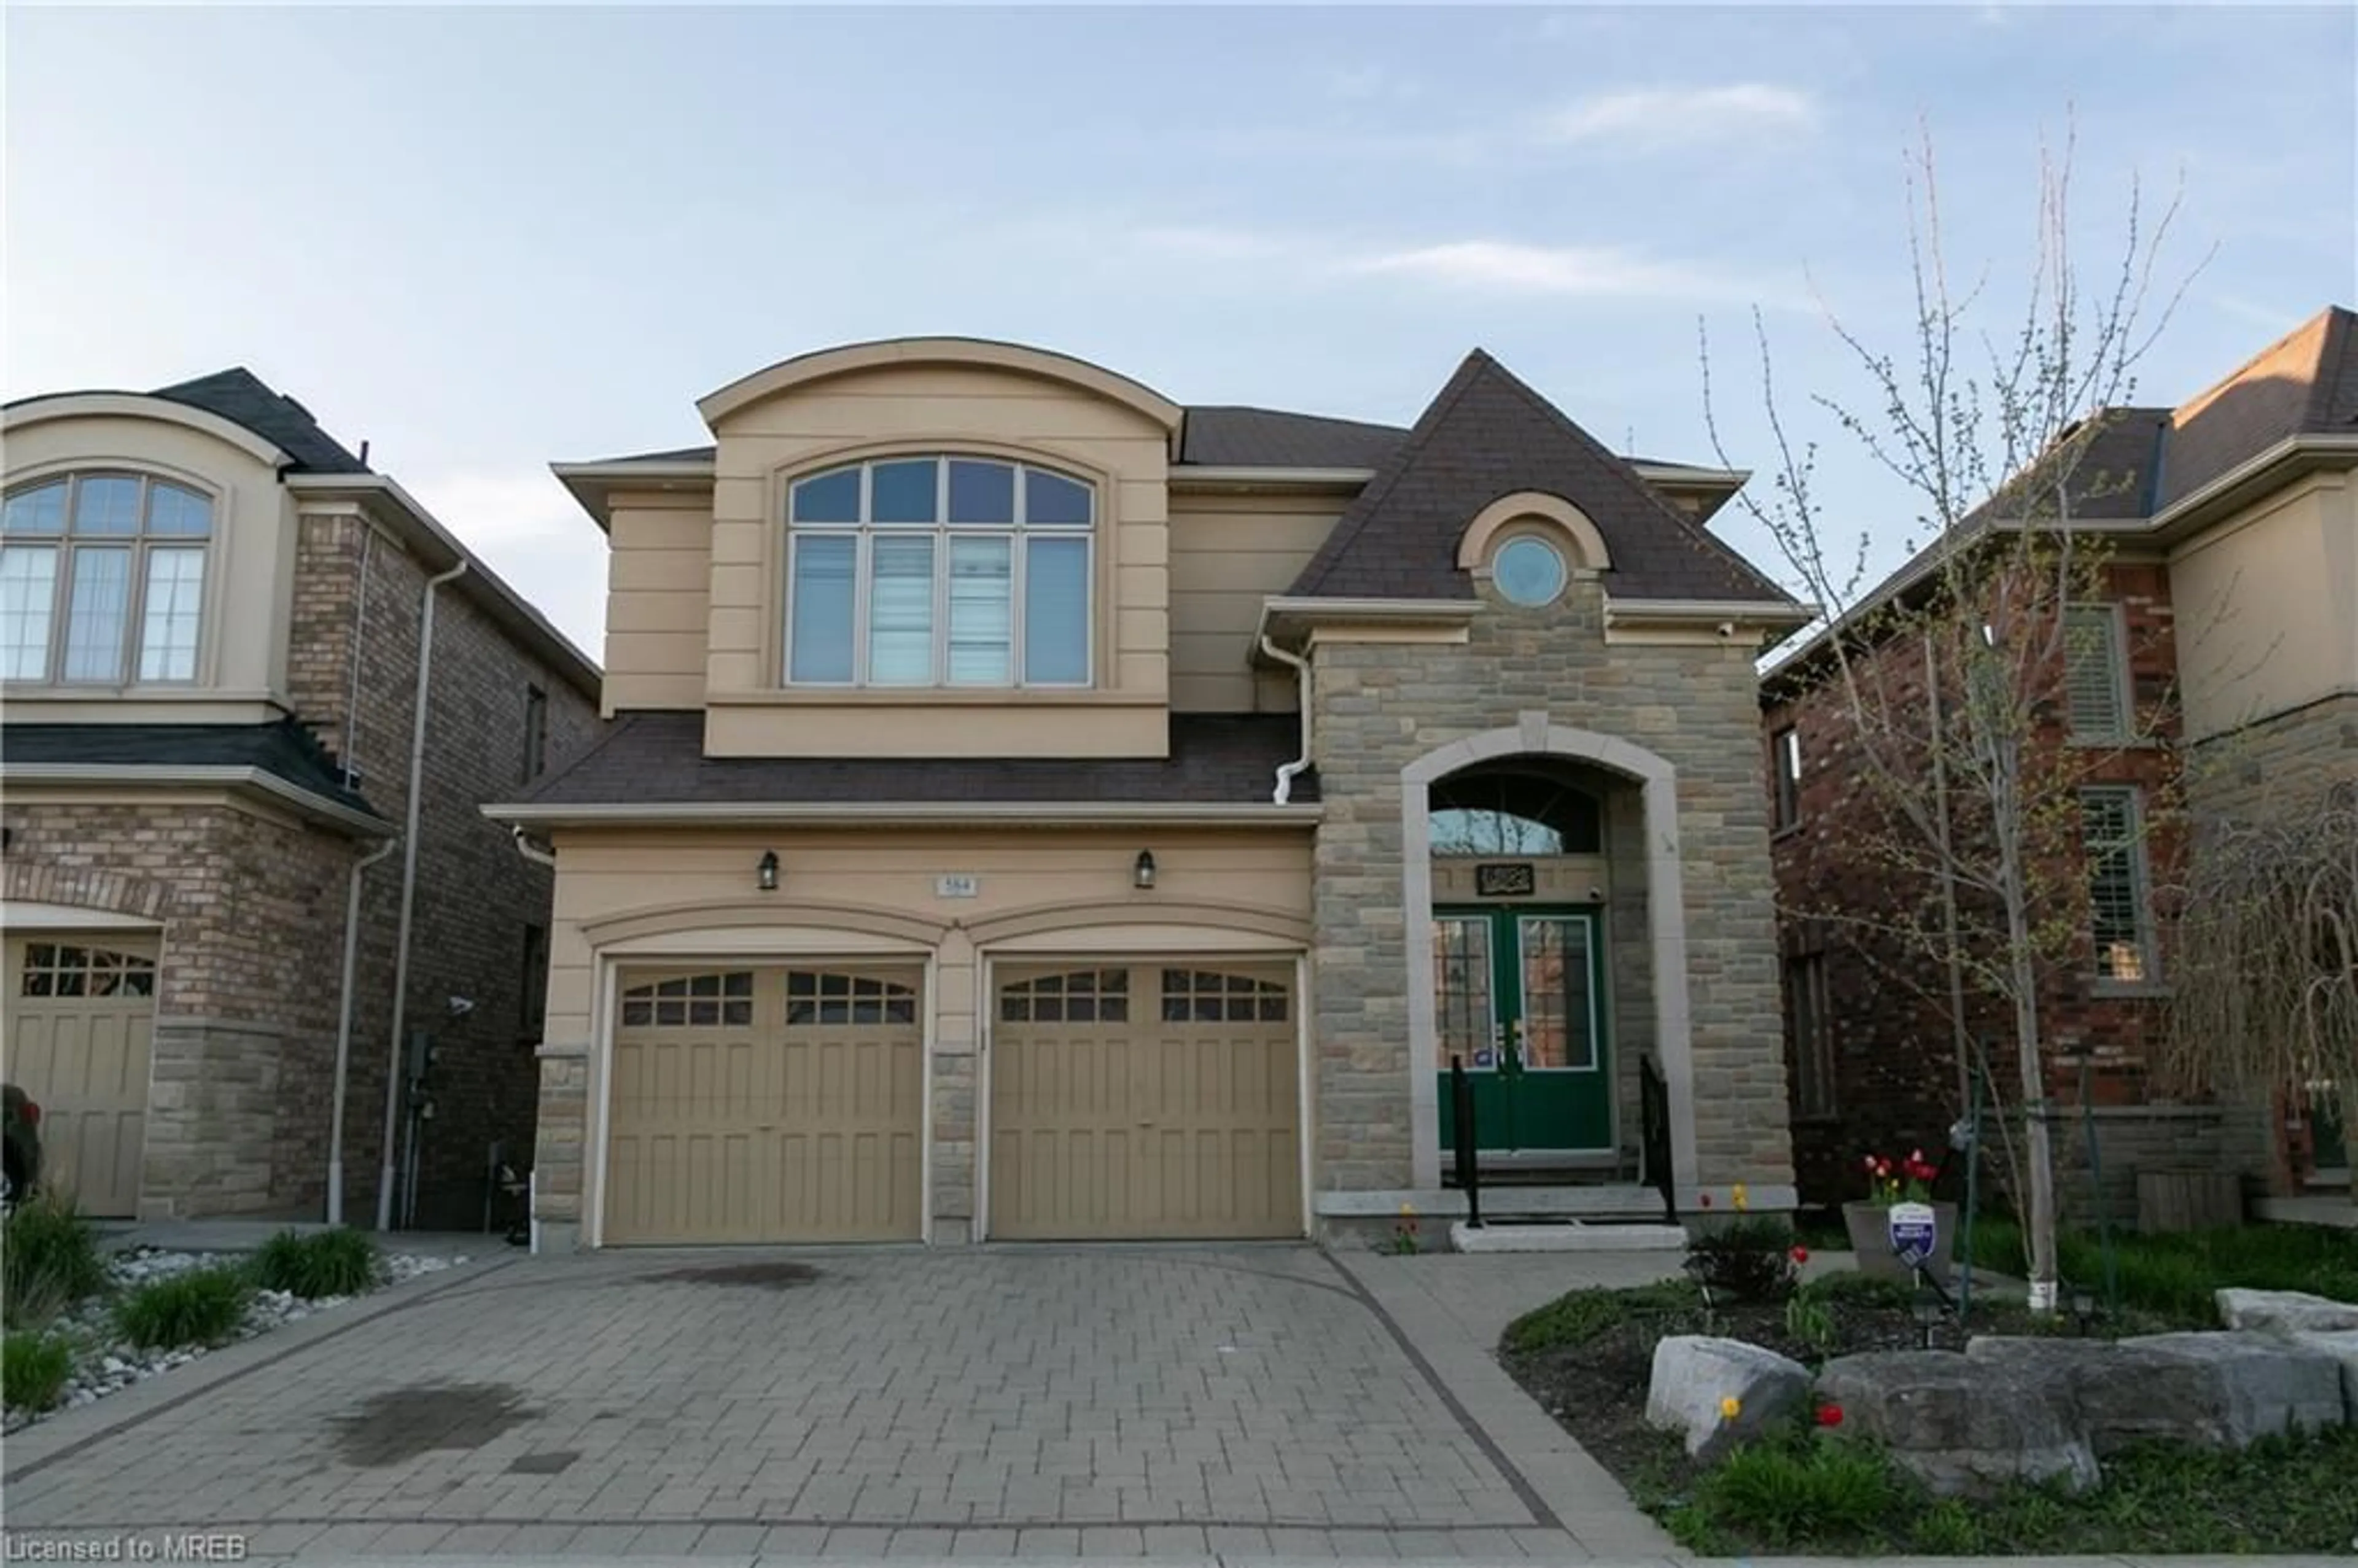 Home with brick exterior material for 584 Pinery Trail, Waterloo Ontario N2V 2Y3